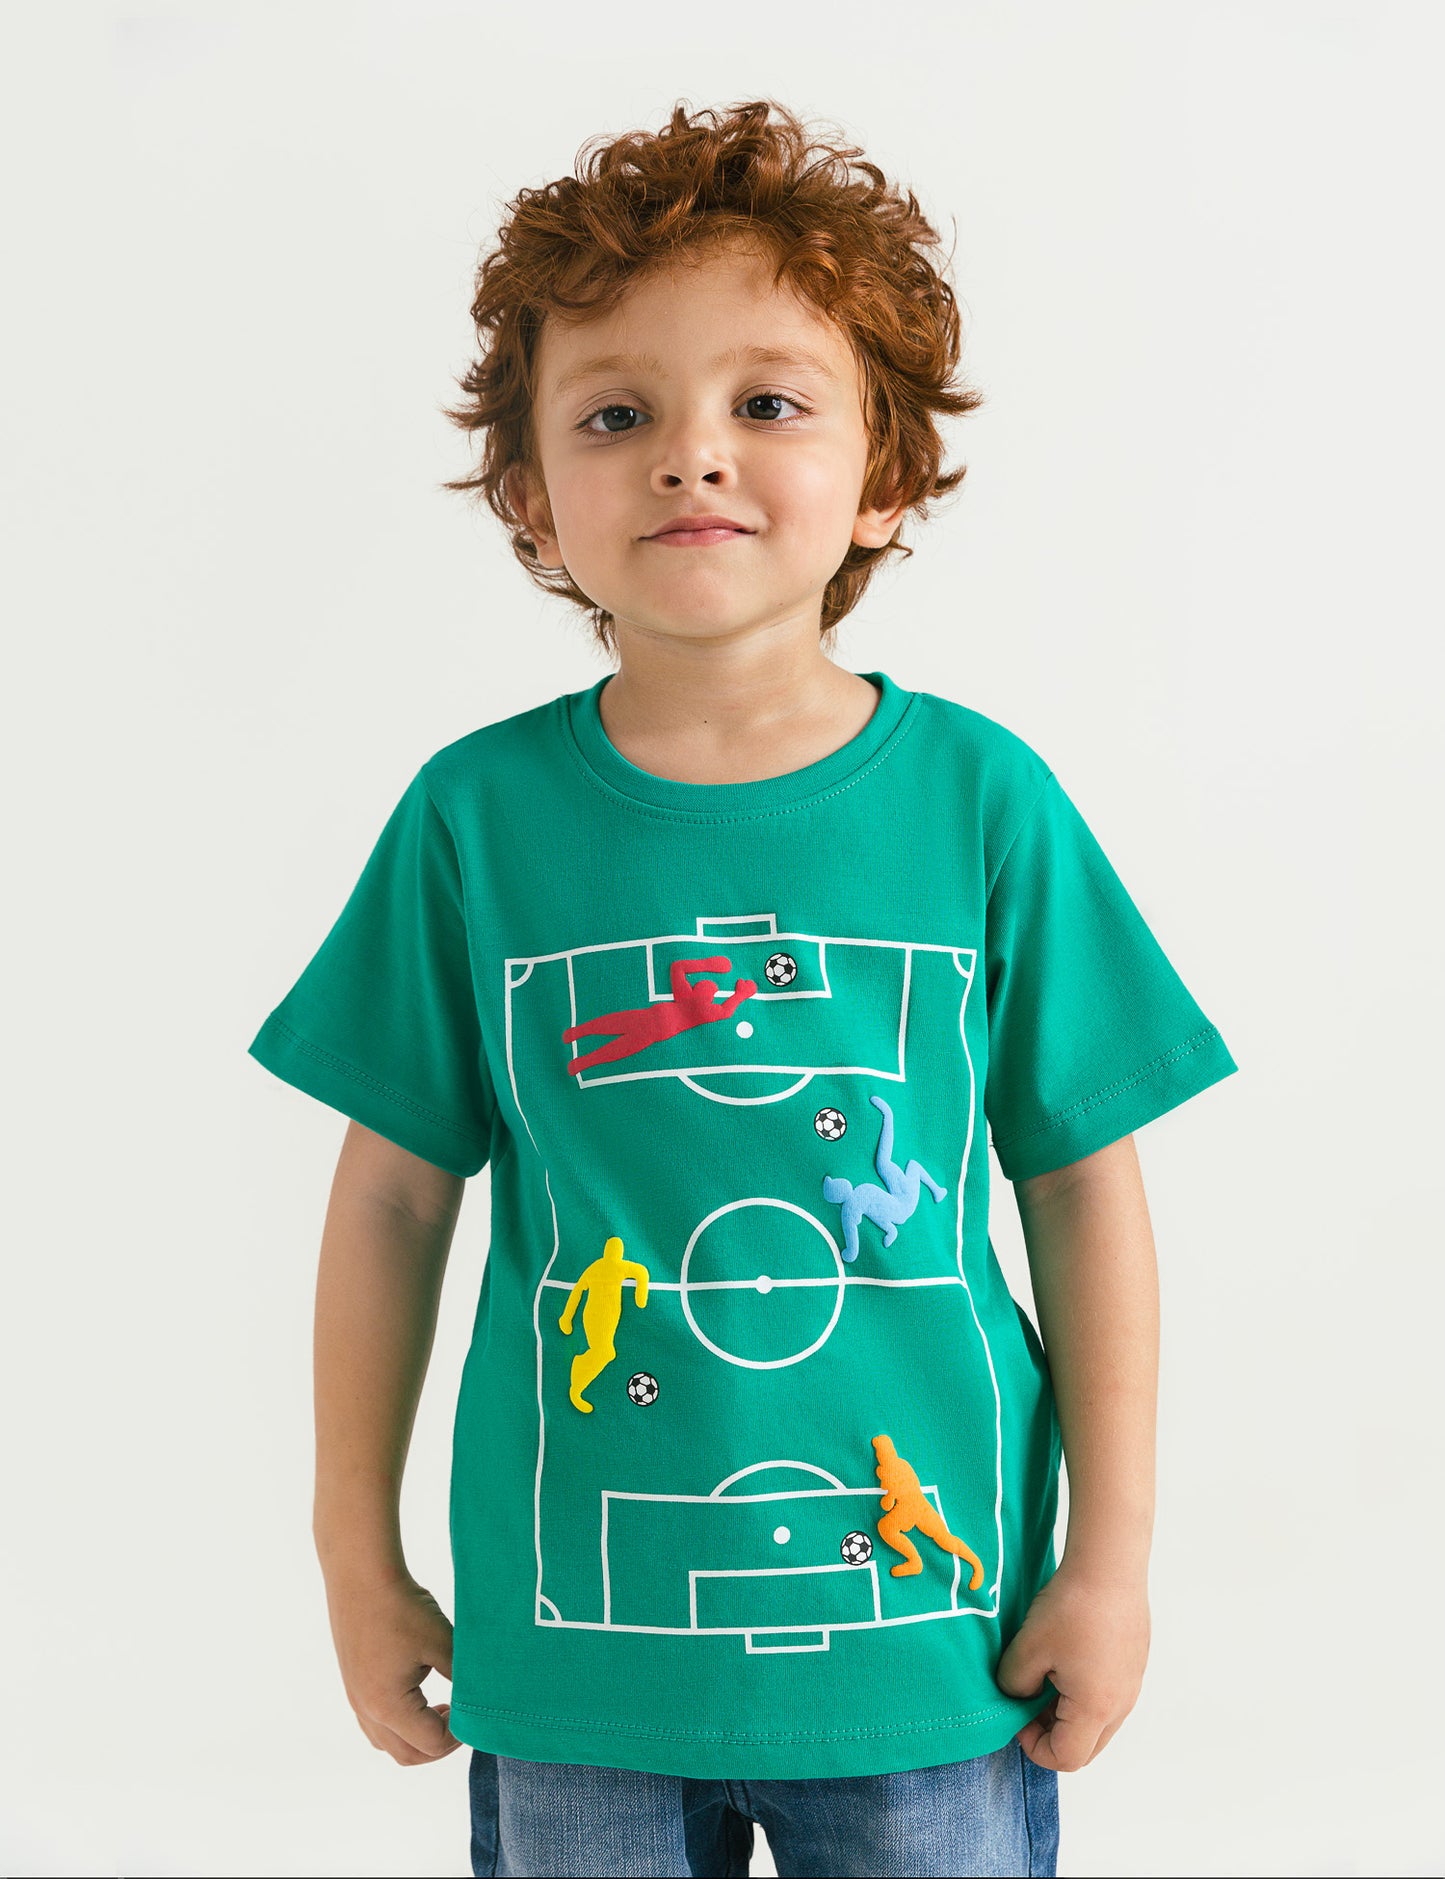 SOCCER GRAPHIC T-SHIRT